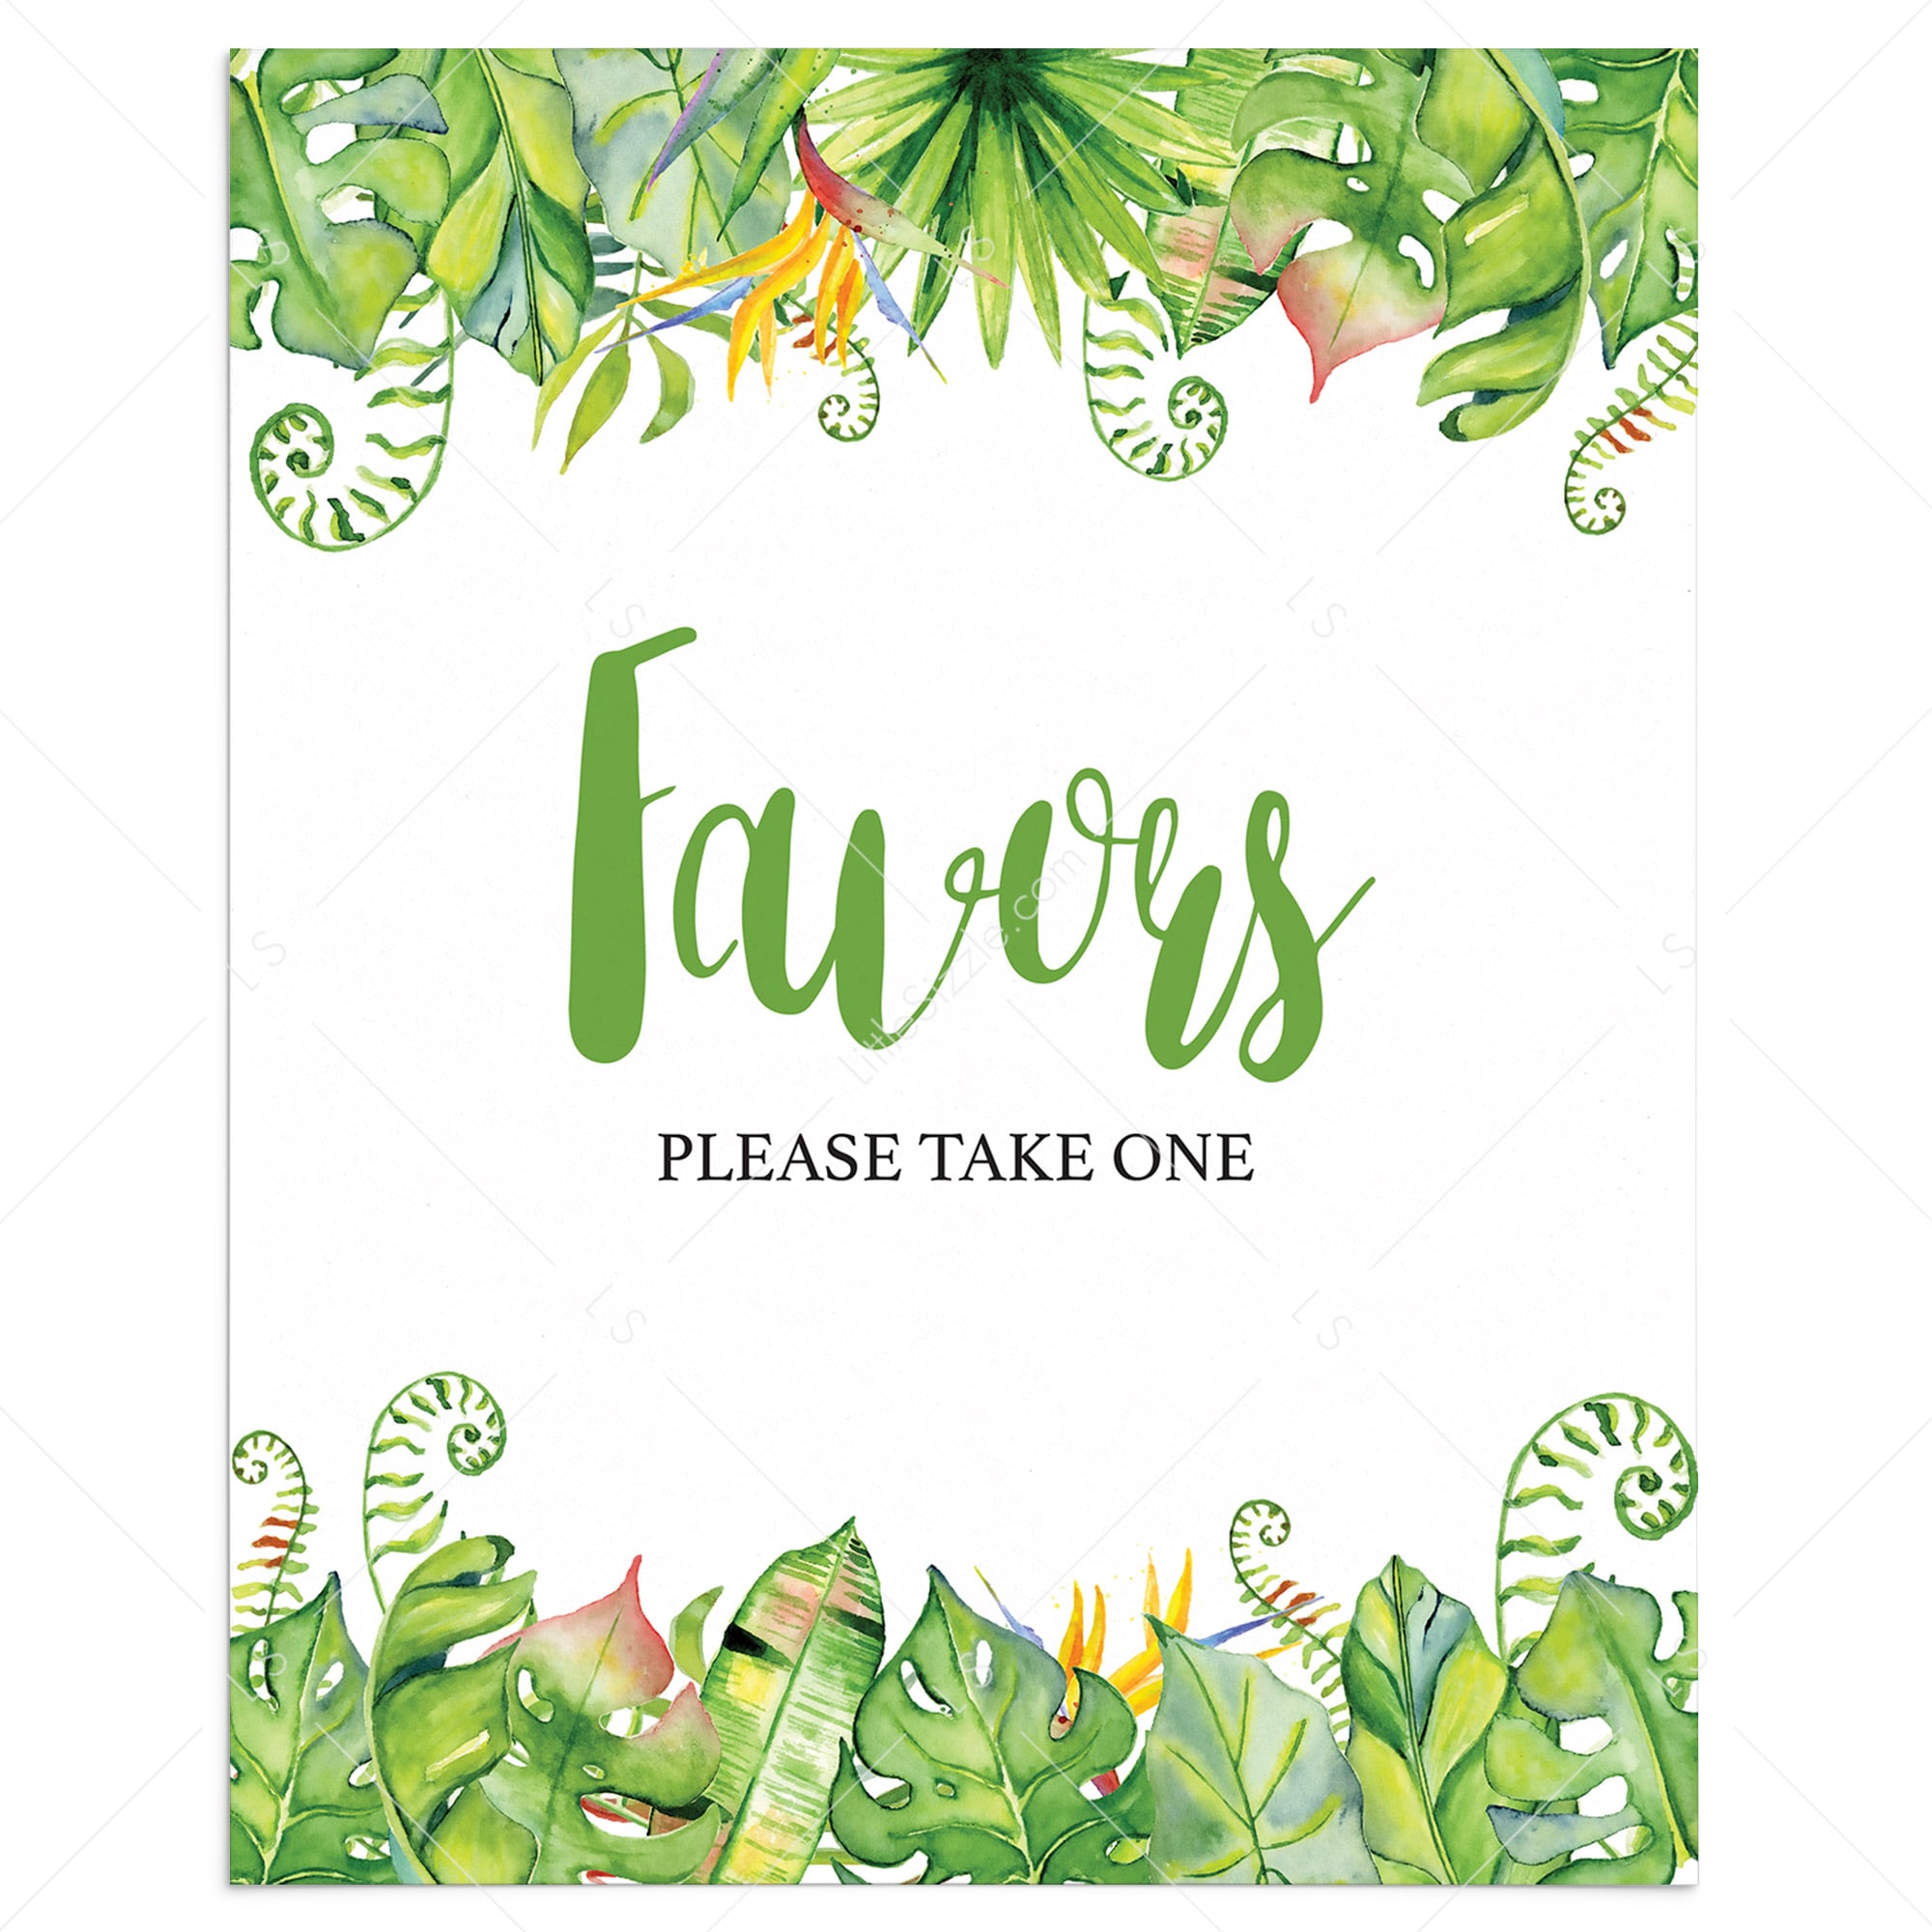 Luau party favors sign download by LittleSizzle